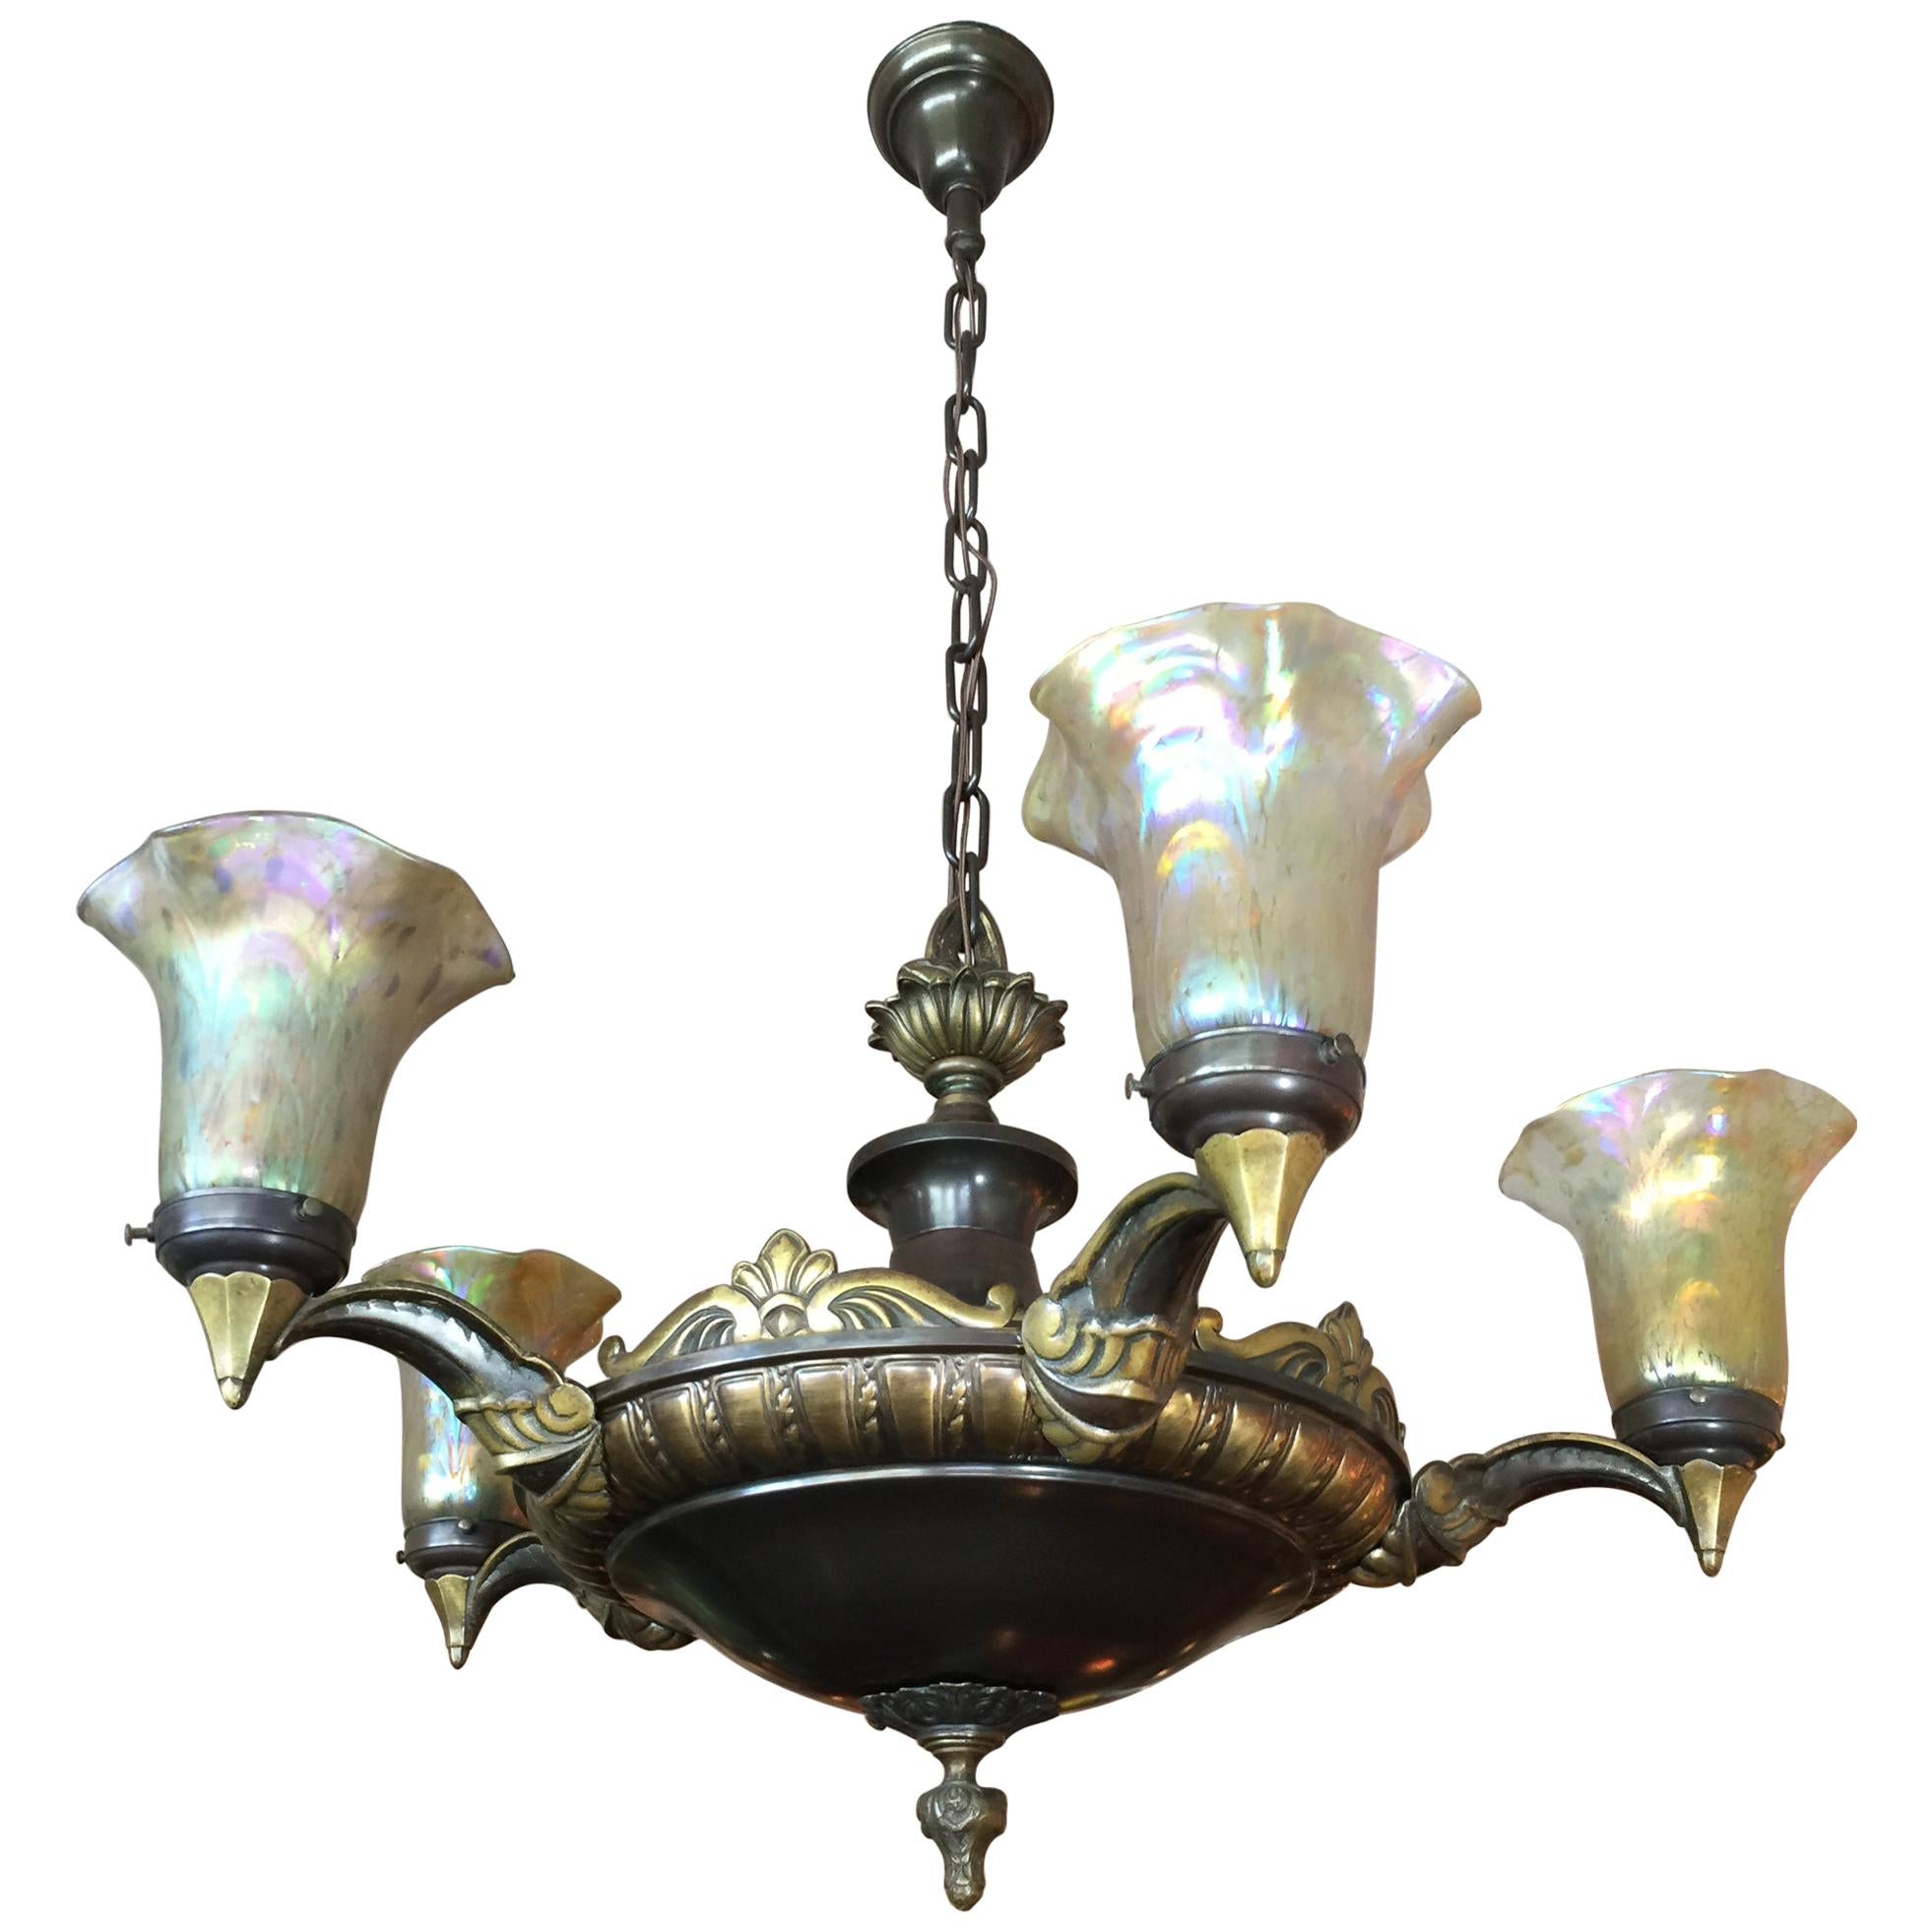 5-Arm Continental Chandelier with 5 Hand Blown Glass Shades, circa 1910